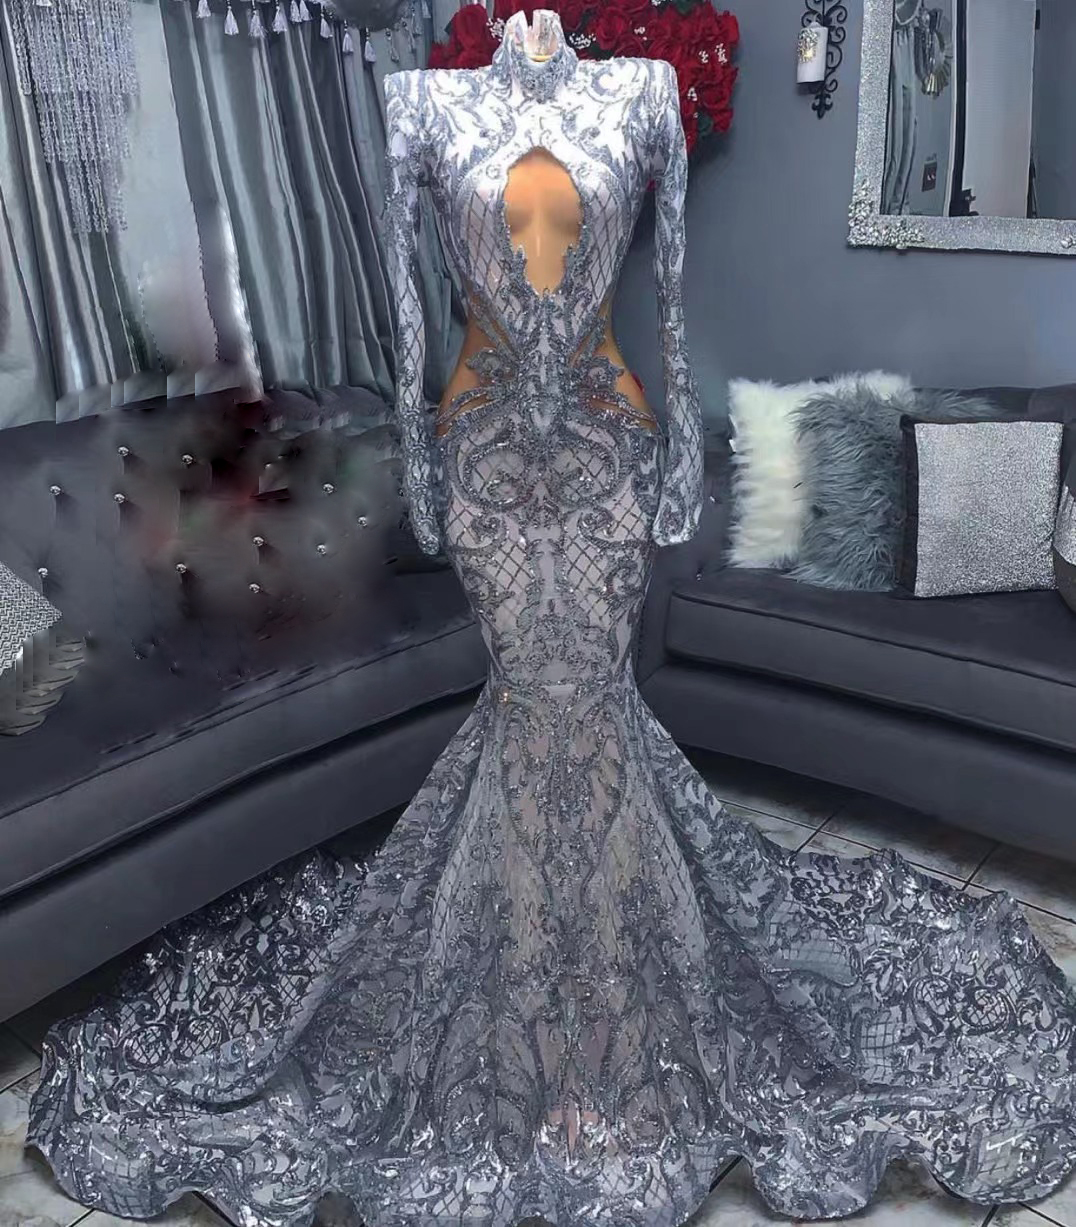 High Neck Prom Dress, Silver Sparkly Prom Dresses, Mermaid Prom Dresses, Elegant Prom Dresses, Vintage Prom Dresses, Robe De Soiree Femme,